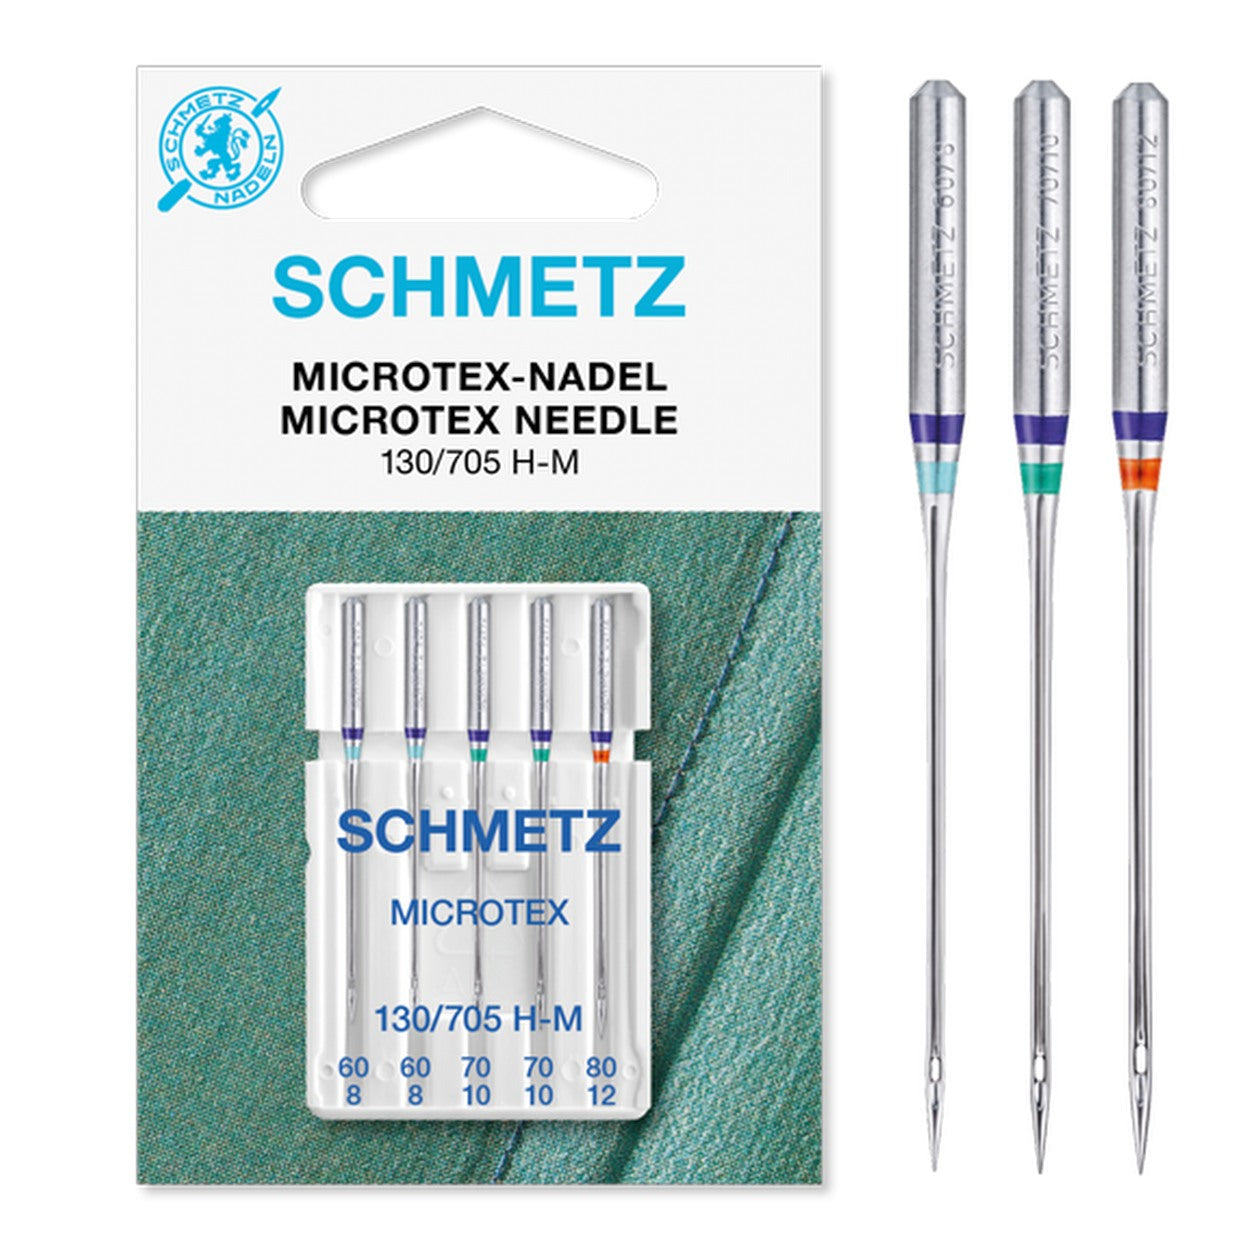 Schmetz Microtex sharp Machine Needles | Pack of 5 from Jaycotts Sewing Supplies